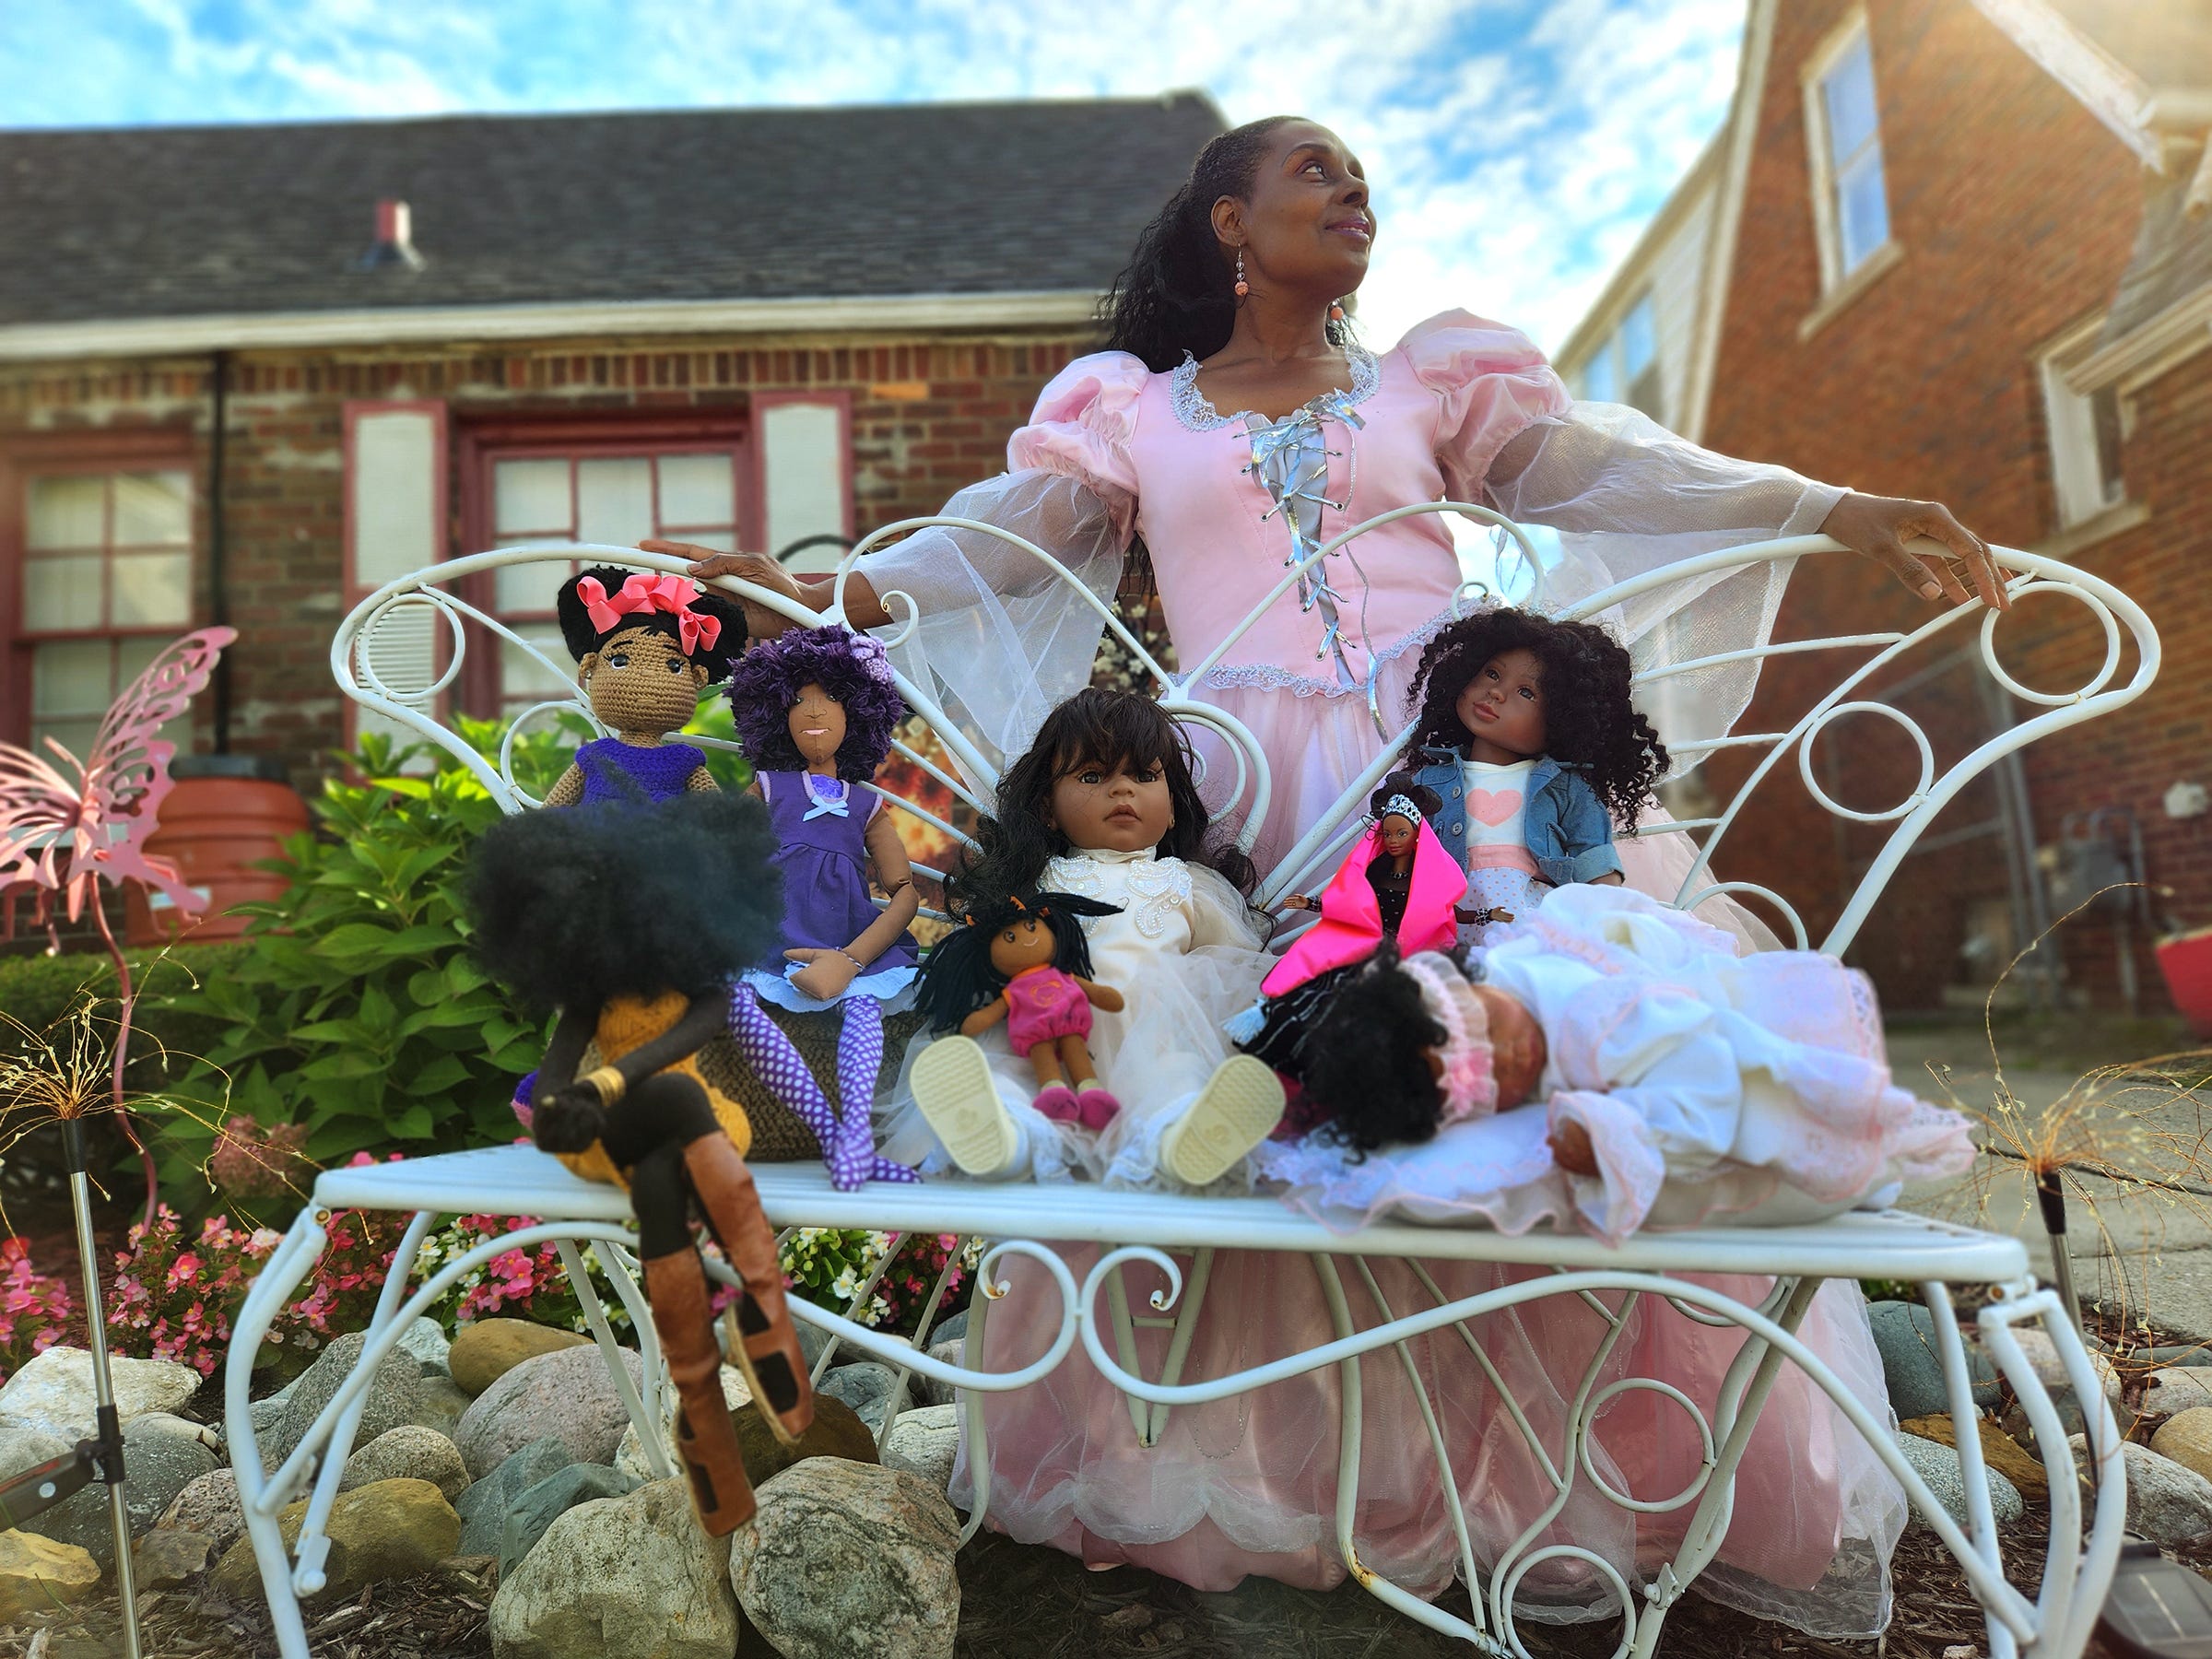 Even when spending time in her beloved butterfly garden at her northwest Detroit home, dolls are still very much on the mind of Sandra Epps, founder of the Detroit Doll Show.  After a two-year absence, the event, which Epps calls "a celebration of history, culture, self-love and diversity" will return Saturday, Nov. 12 at the Marygrove Conservancy.